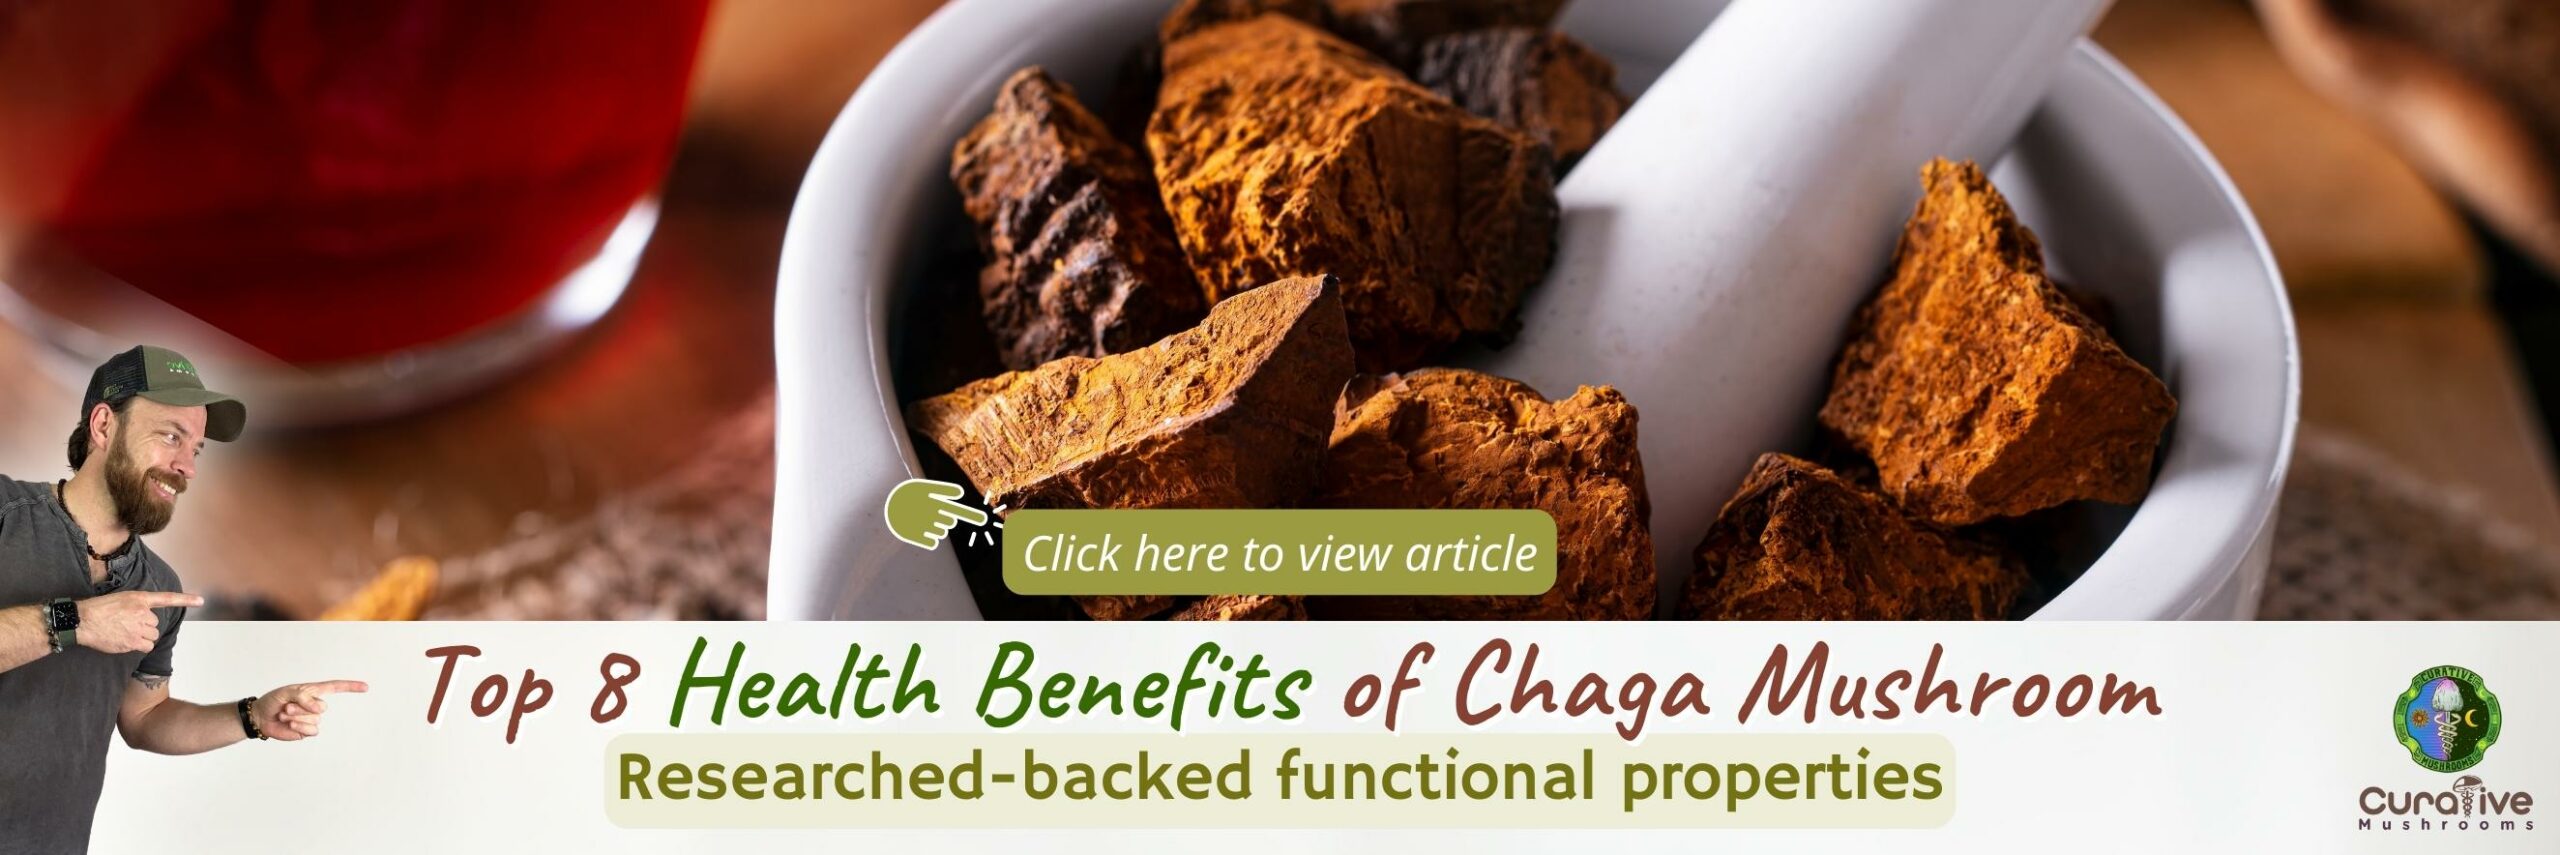 Top 8 Health Benefits of Chaga Mushroom - Researched-backed functional properties - click here to view